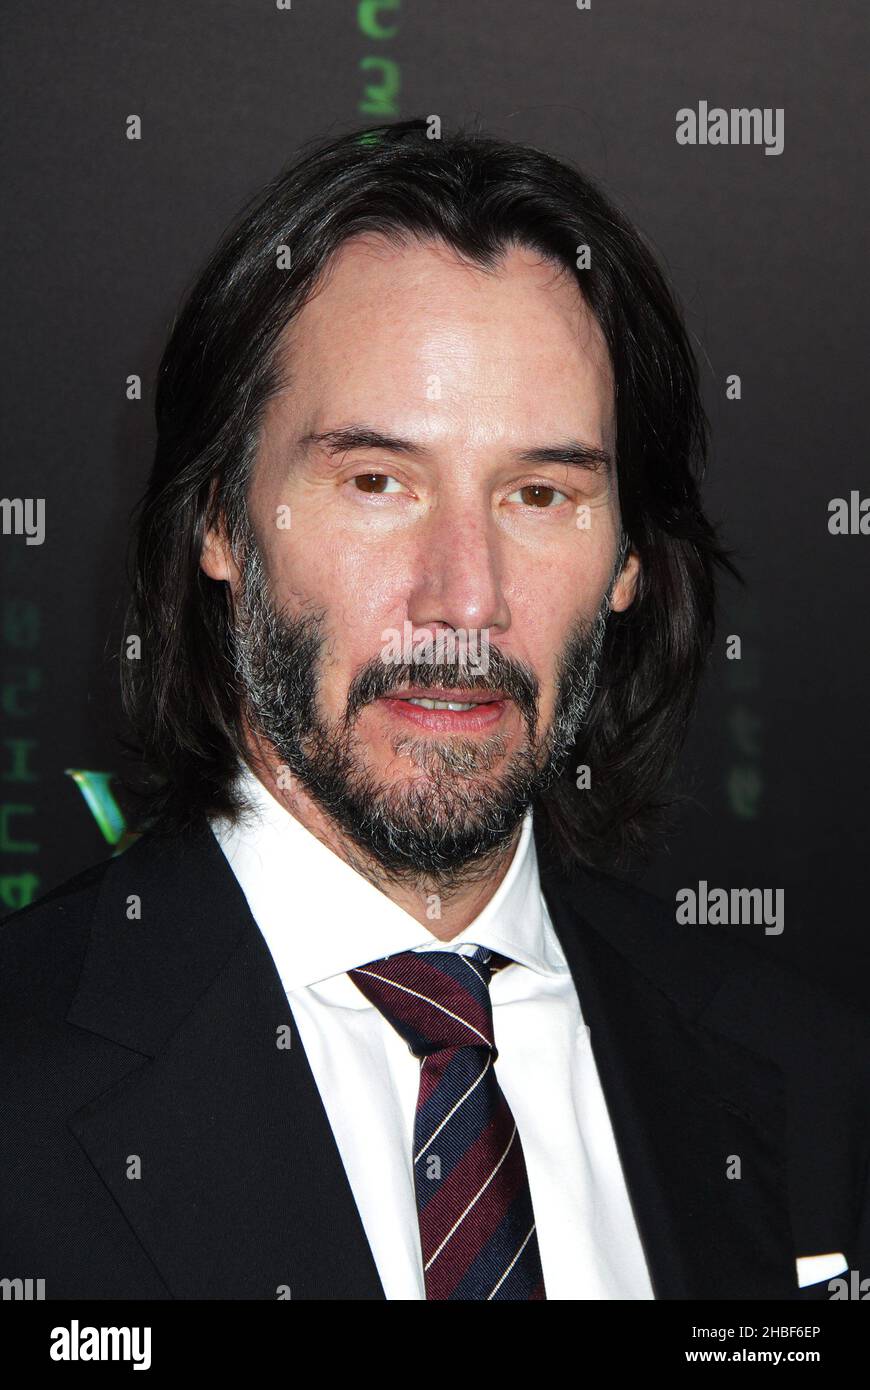 Keanu Reeves 12/18/2021 The U.S. Premiere of "The Matrix Resurrections"  held at Castro Theatre in San Francisco, CA Photo by Kazuki  Hirata/HollywoodNewsWire.net Credit: Hollywood News Wire Inc./Alamy Live  News Stock Photo -